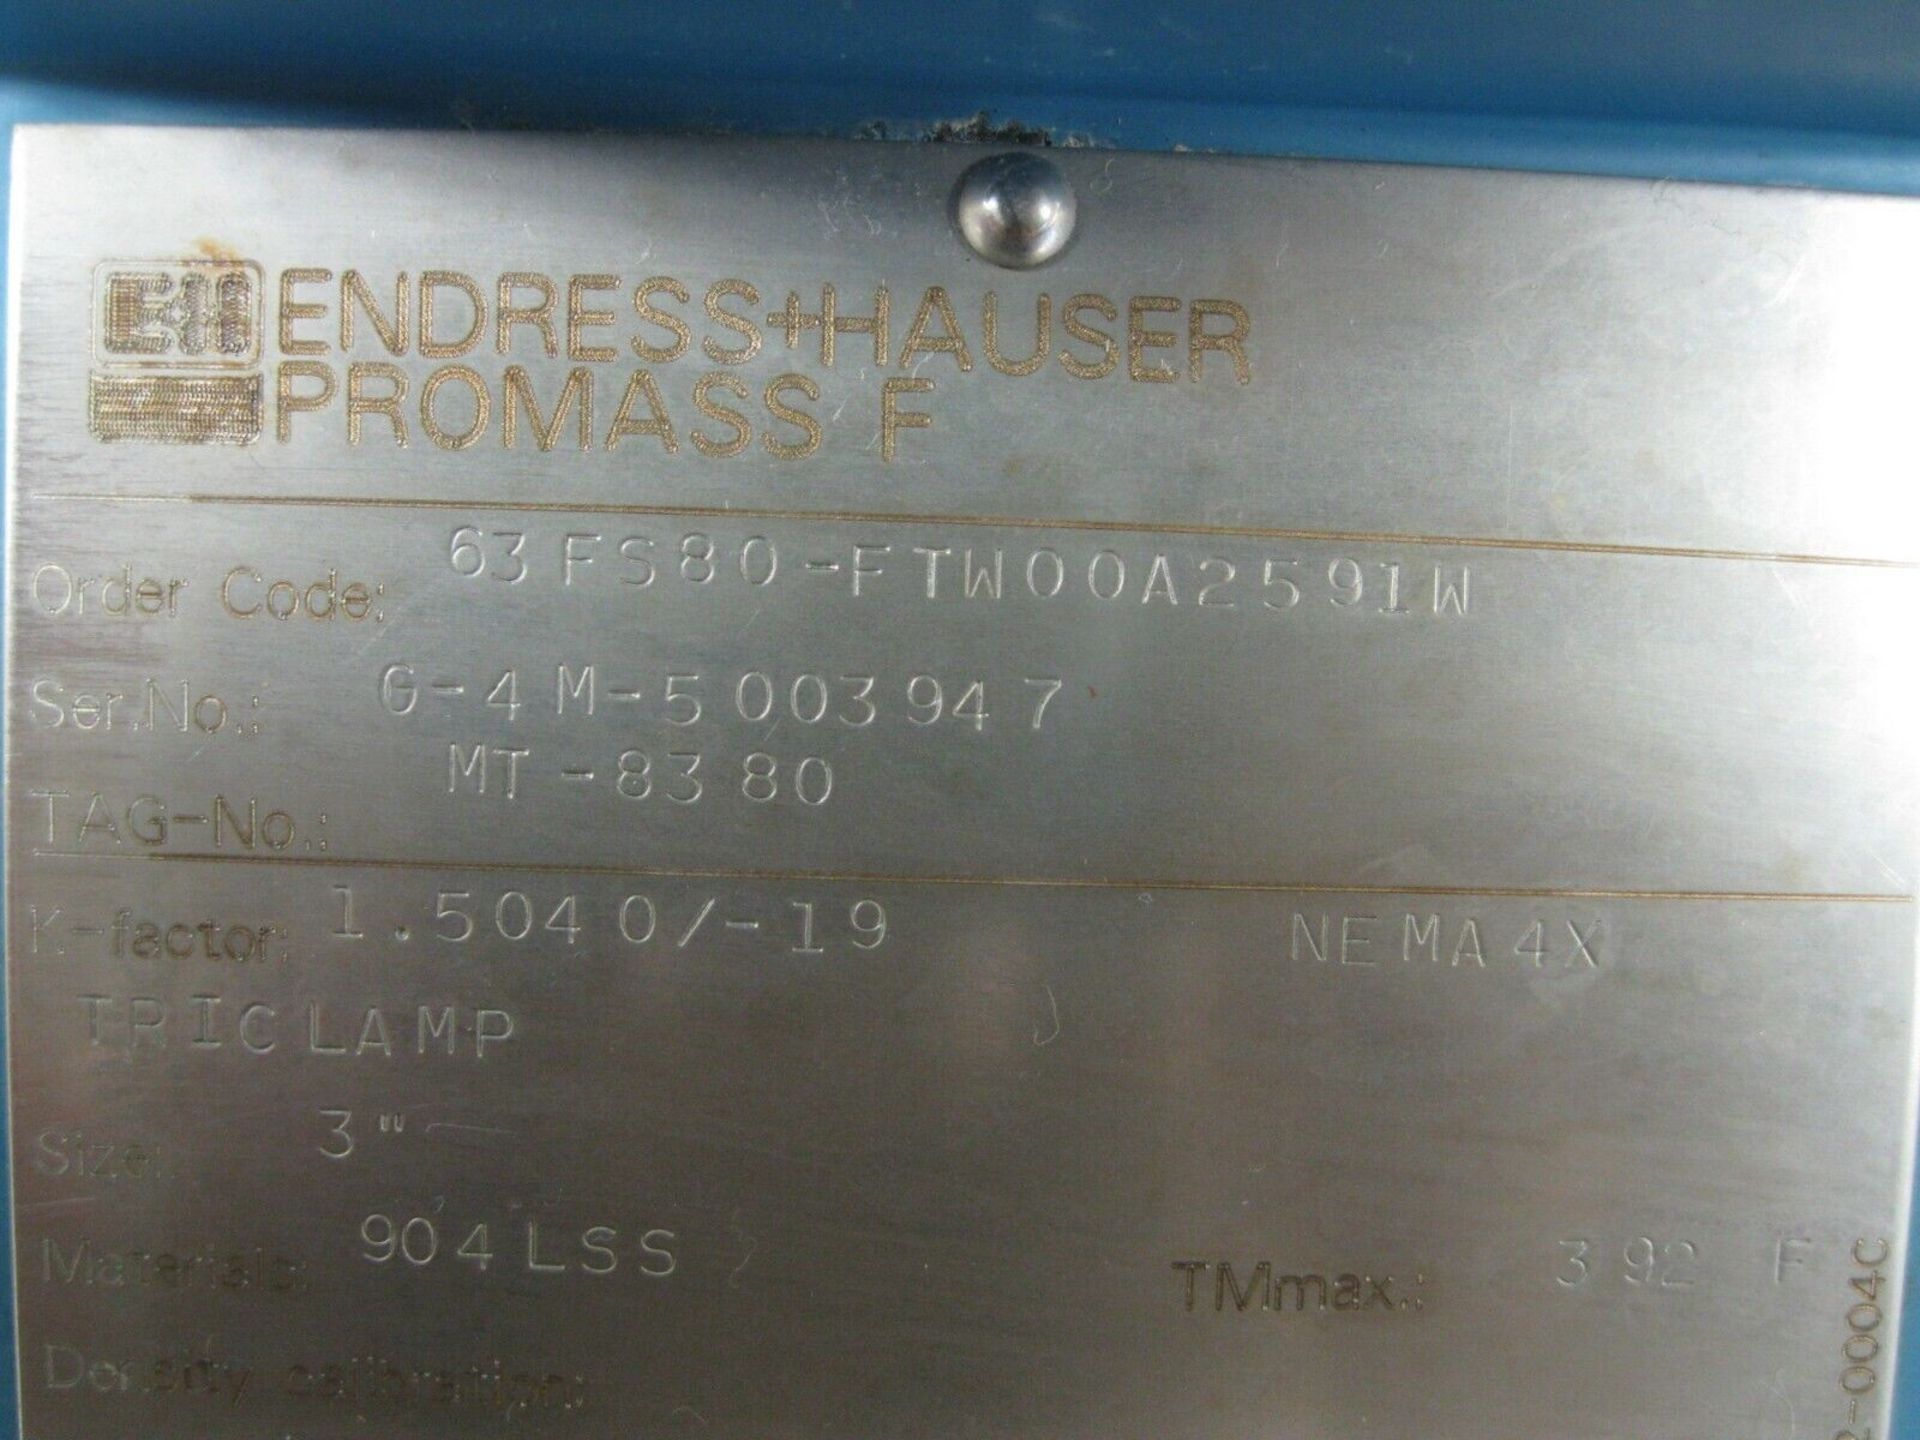 3" Endress Hauser 63FS80-FTW00A2591W Promass 63 F Flowmeter Profibus (Located Springfield, NH) ( - Image 2 of 6